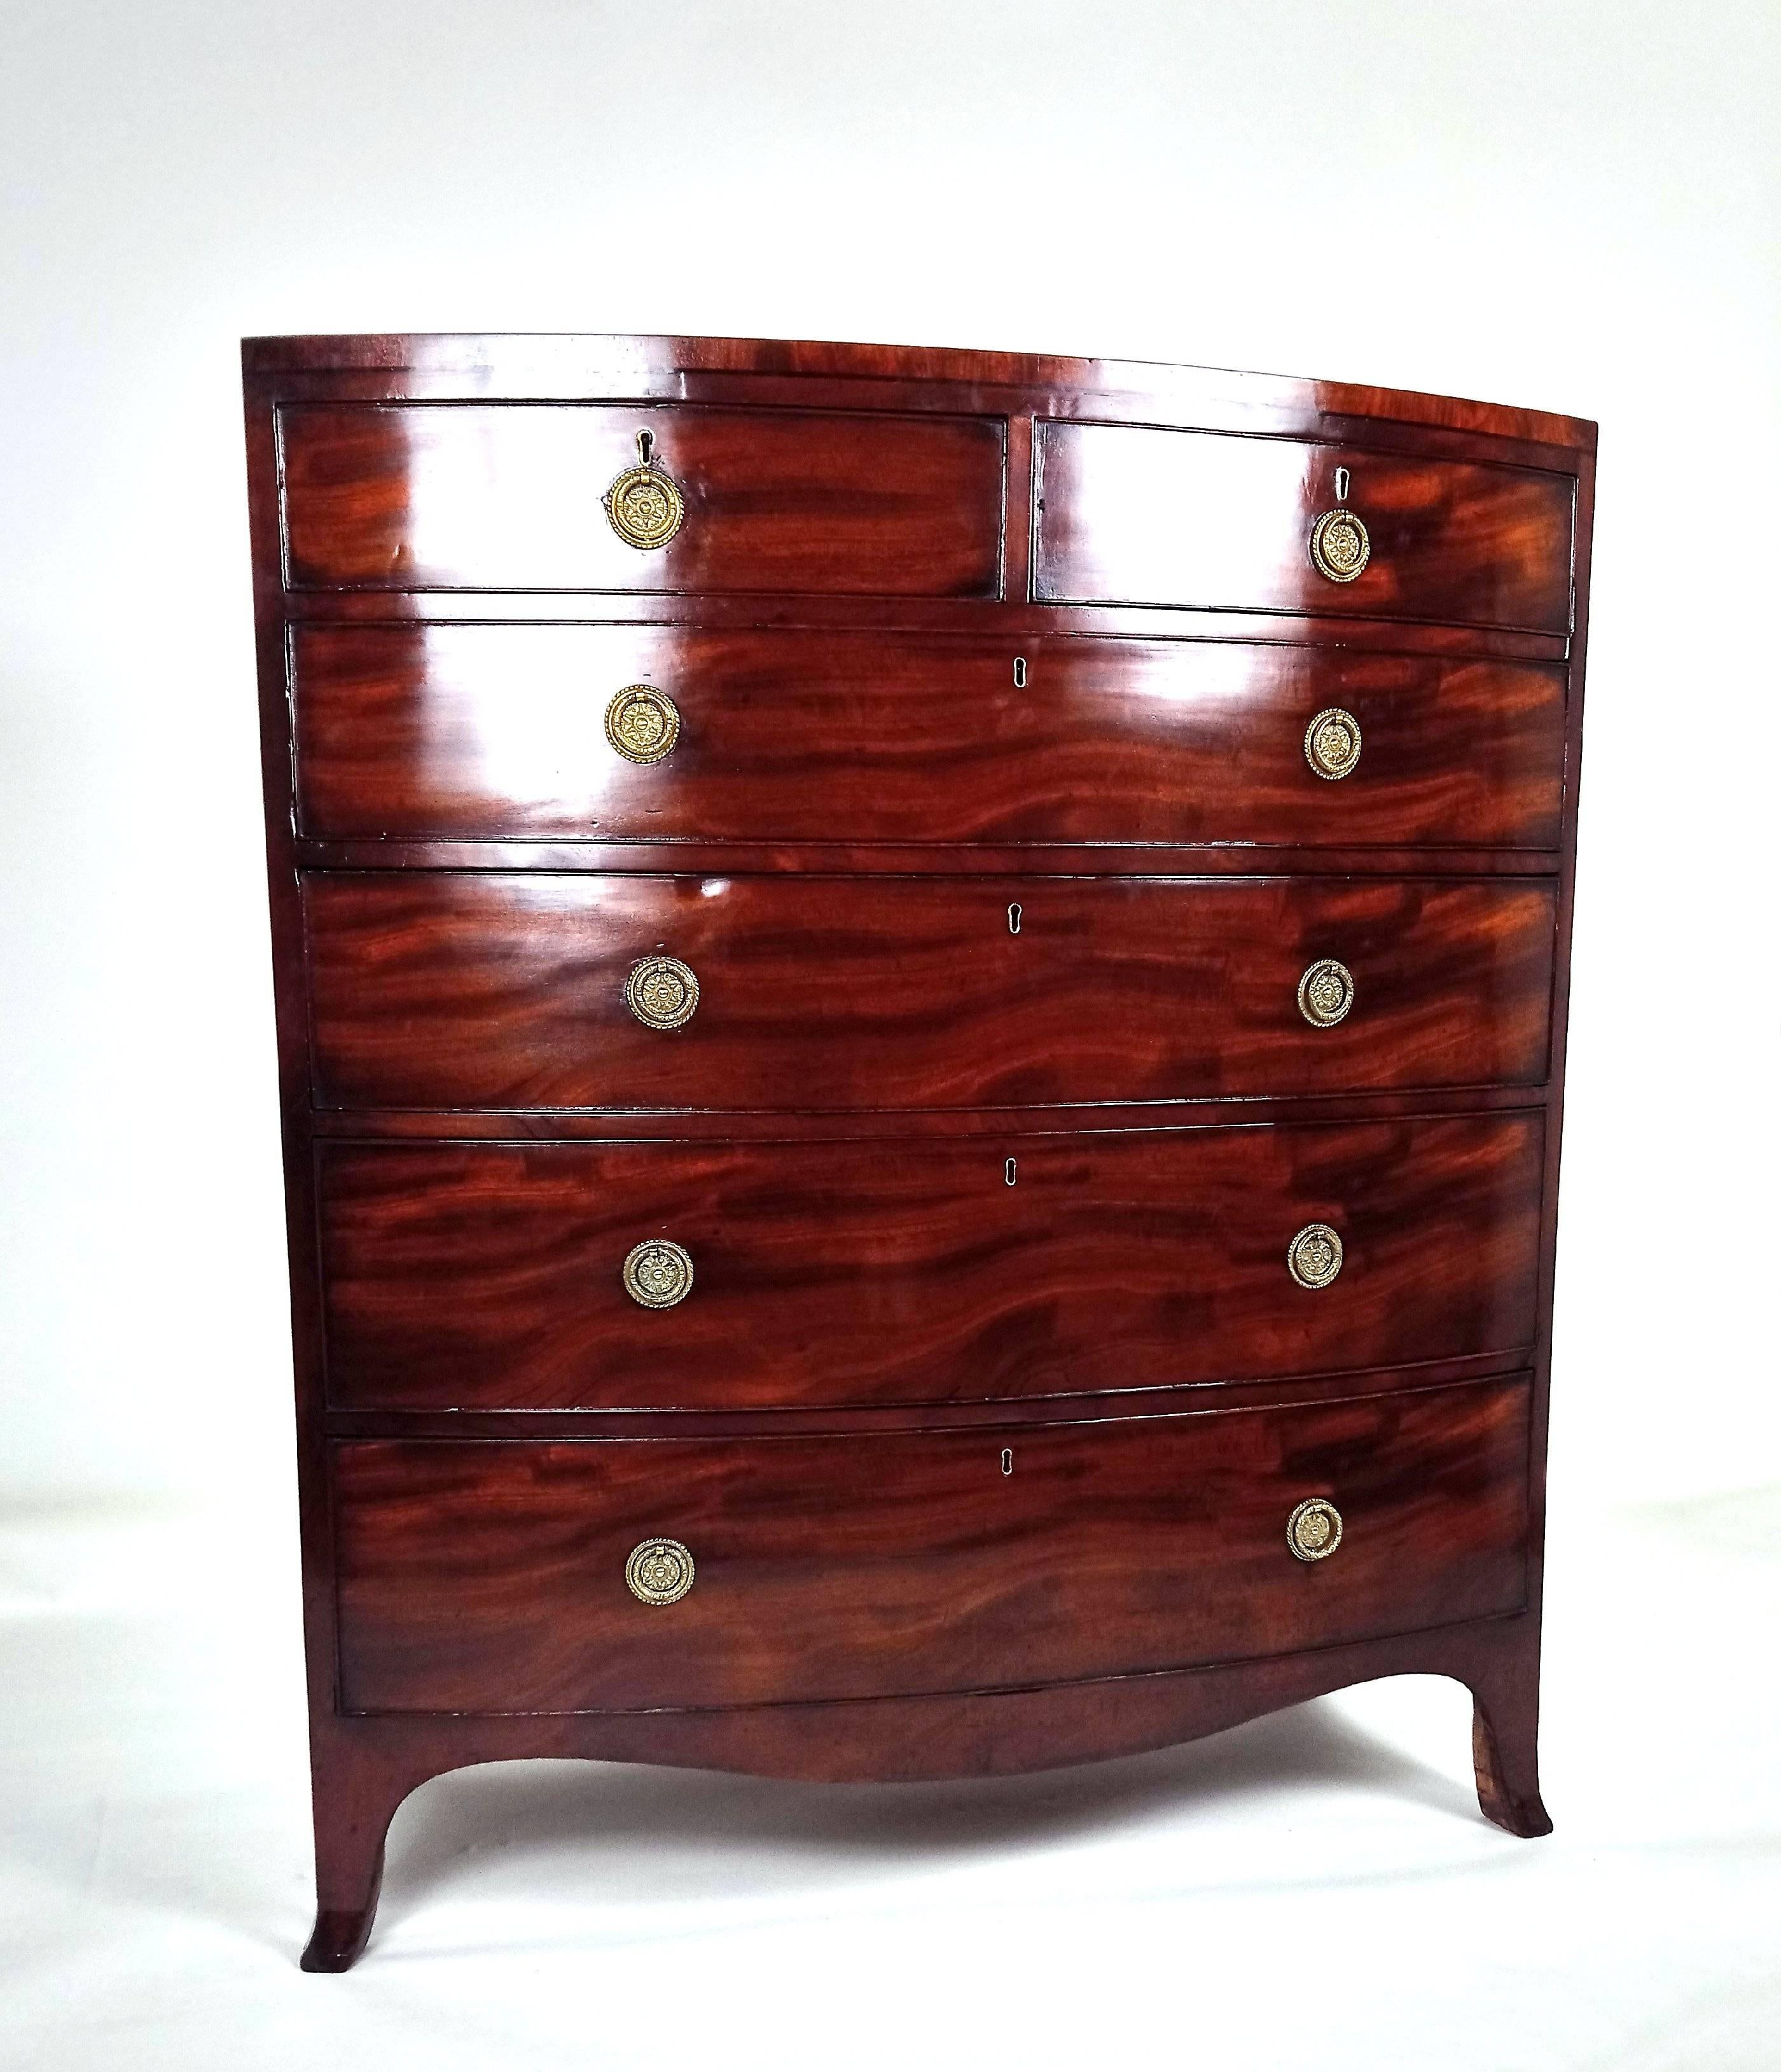 This splendid and very good looking George III figured mahogany bow fronted chest of drawers consists of two short over four long graduated drawers with ornate brass pull rings. It features ebony line inlaid decoration and is oak lined throughout,